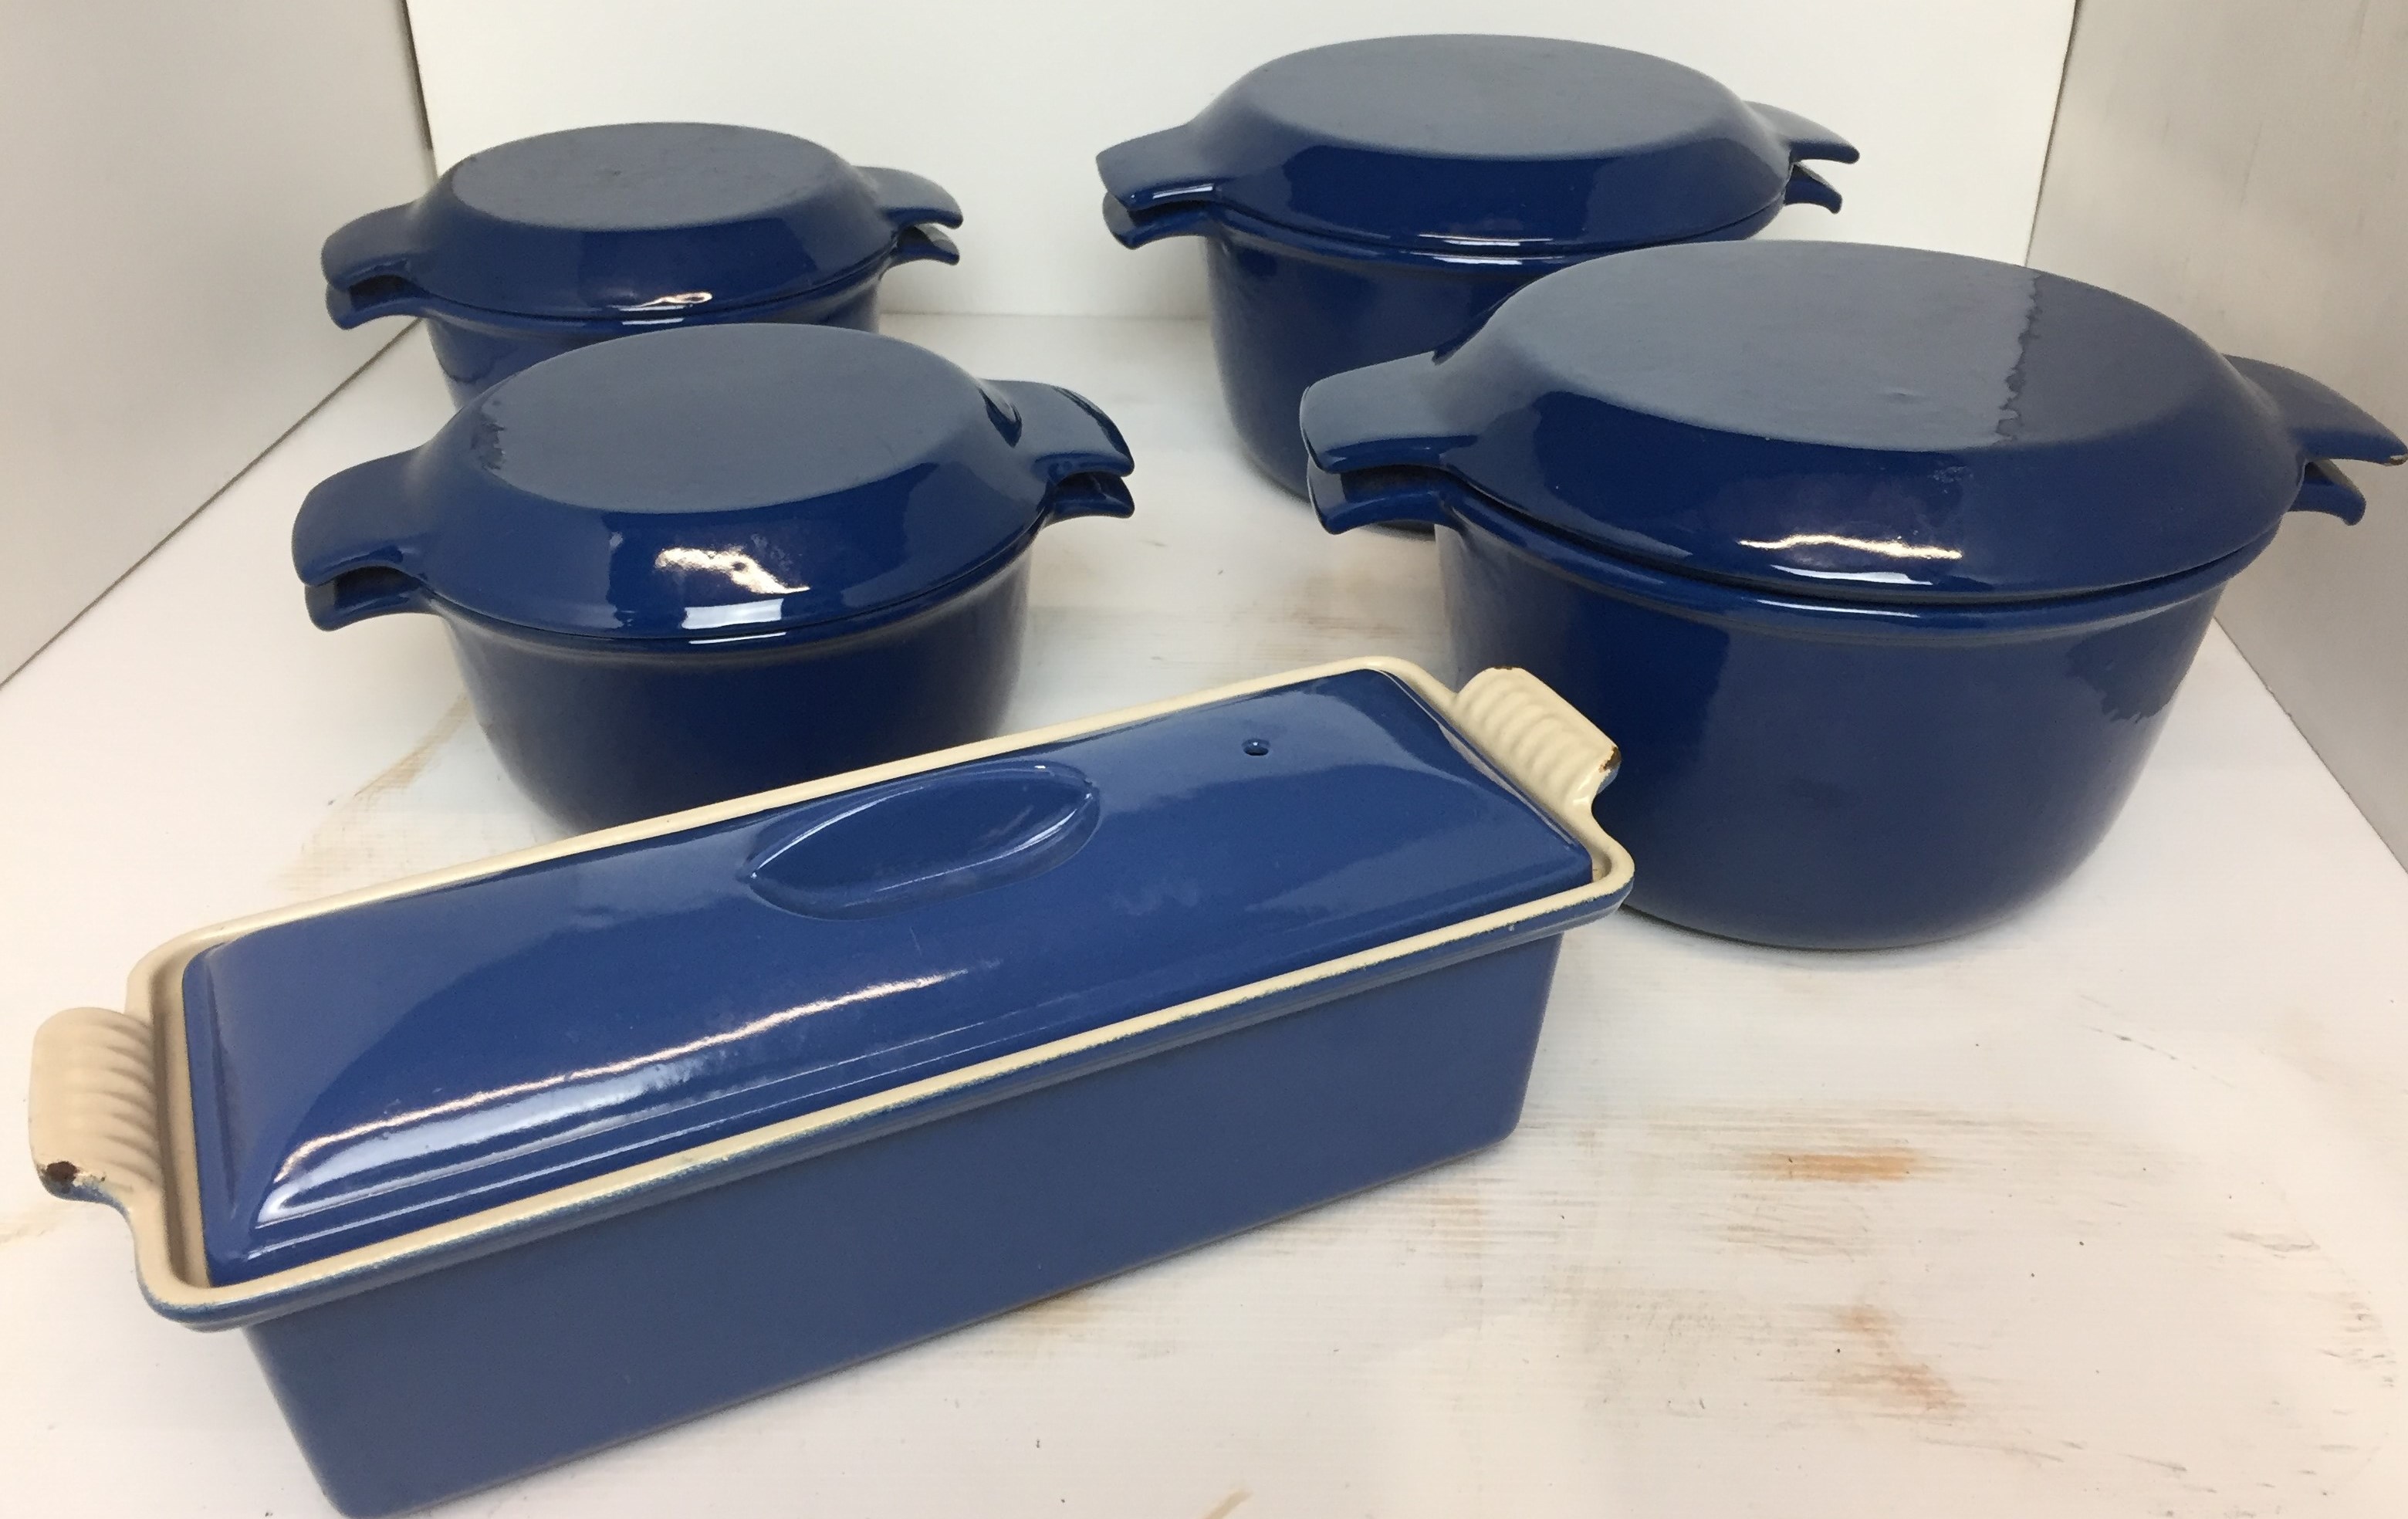 Five pieces of blue enamel cast iron oven to table ware including four casseroles by Nacco of